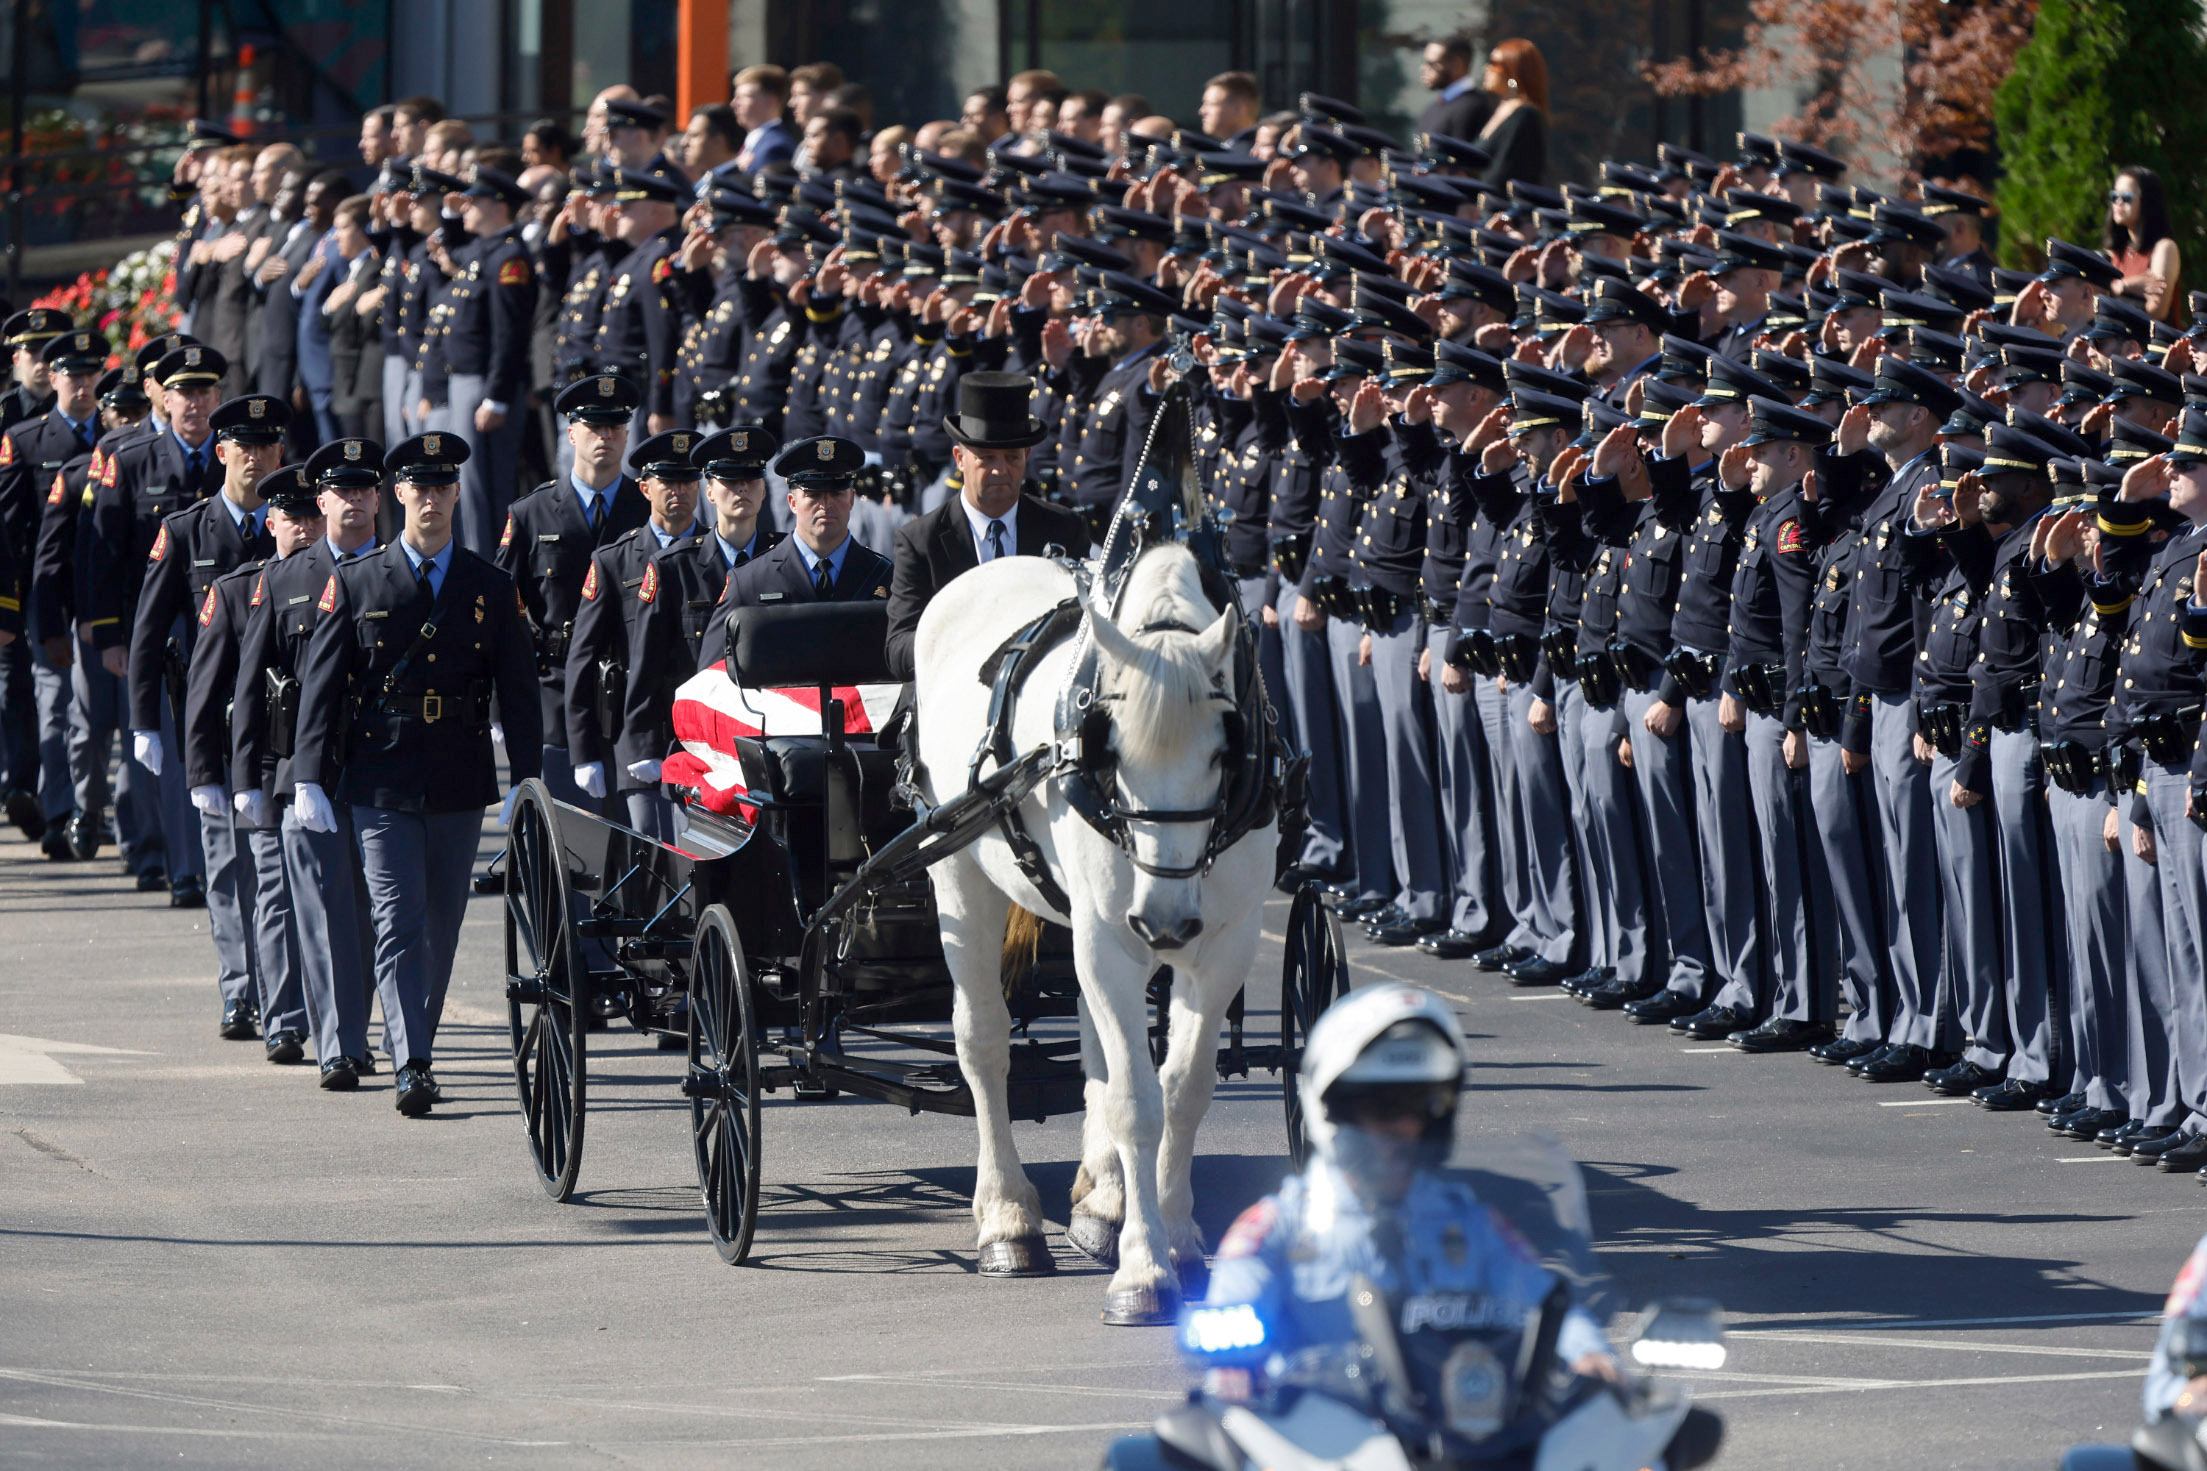 PHOTO: A funeral caisson transports the casket of Raleigh Police Officer Gabriel Torres to Cross Assembly Church in Raleigh, N.C. for his funeral, Oct. 22, 2022.